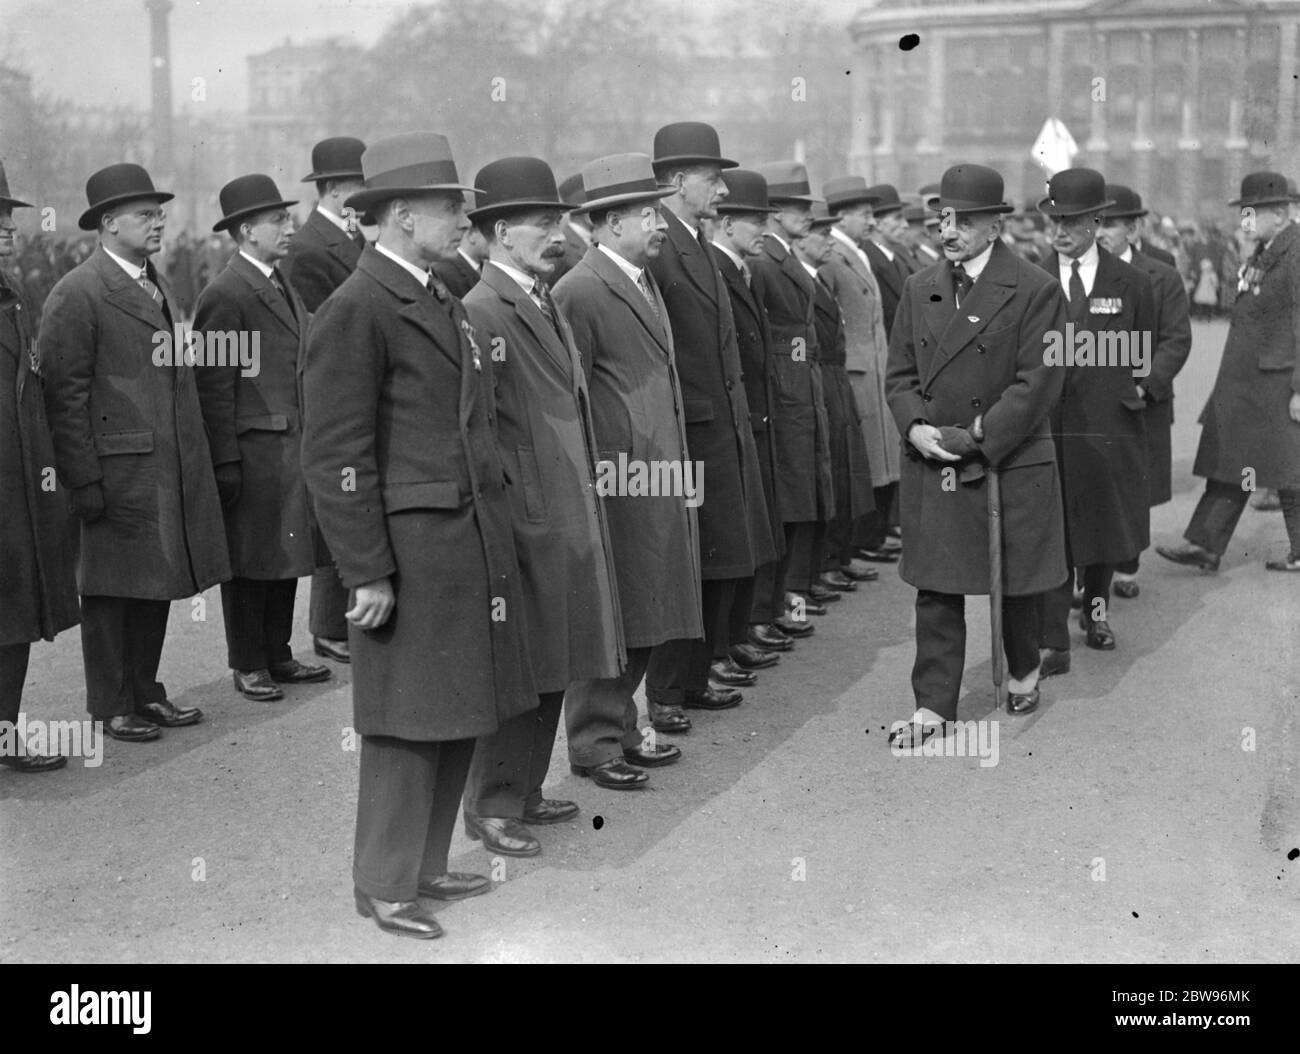 Fourteenth anniversary of Fifth Army Retreat commemorated in London . General Sir Ivor Maxe , inspected the  Red Fox Comrades  Association , who took part in the Fifth Army Retreat , fourteen years ago during the War , at the Horse Guards Parade , London . General Sir Ivor Maxe inspecting the  Red Fox Comrades  Association at the parade . 20 March 1932 Stock Photo